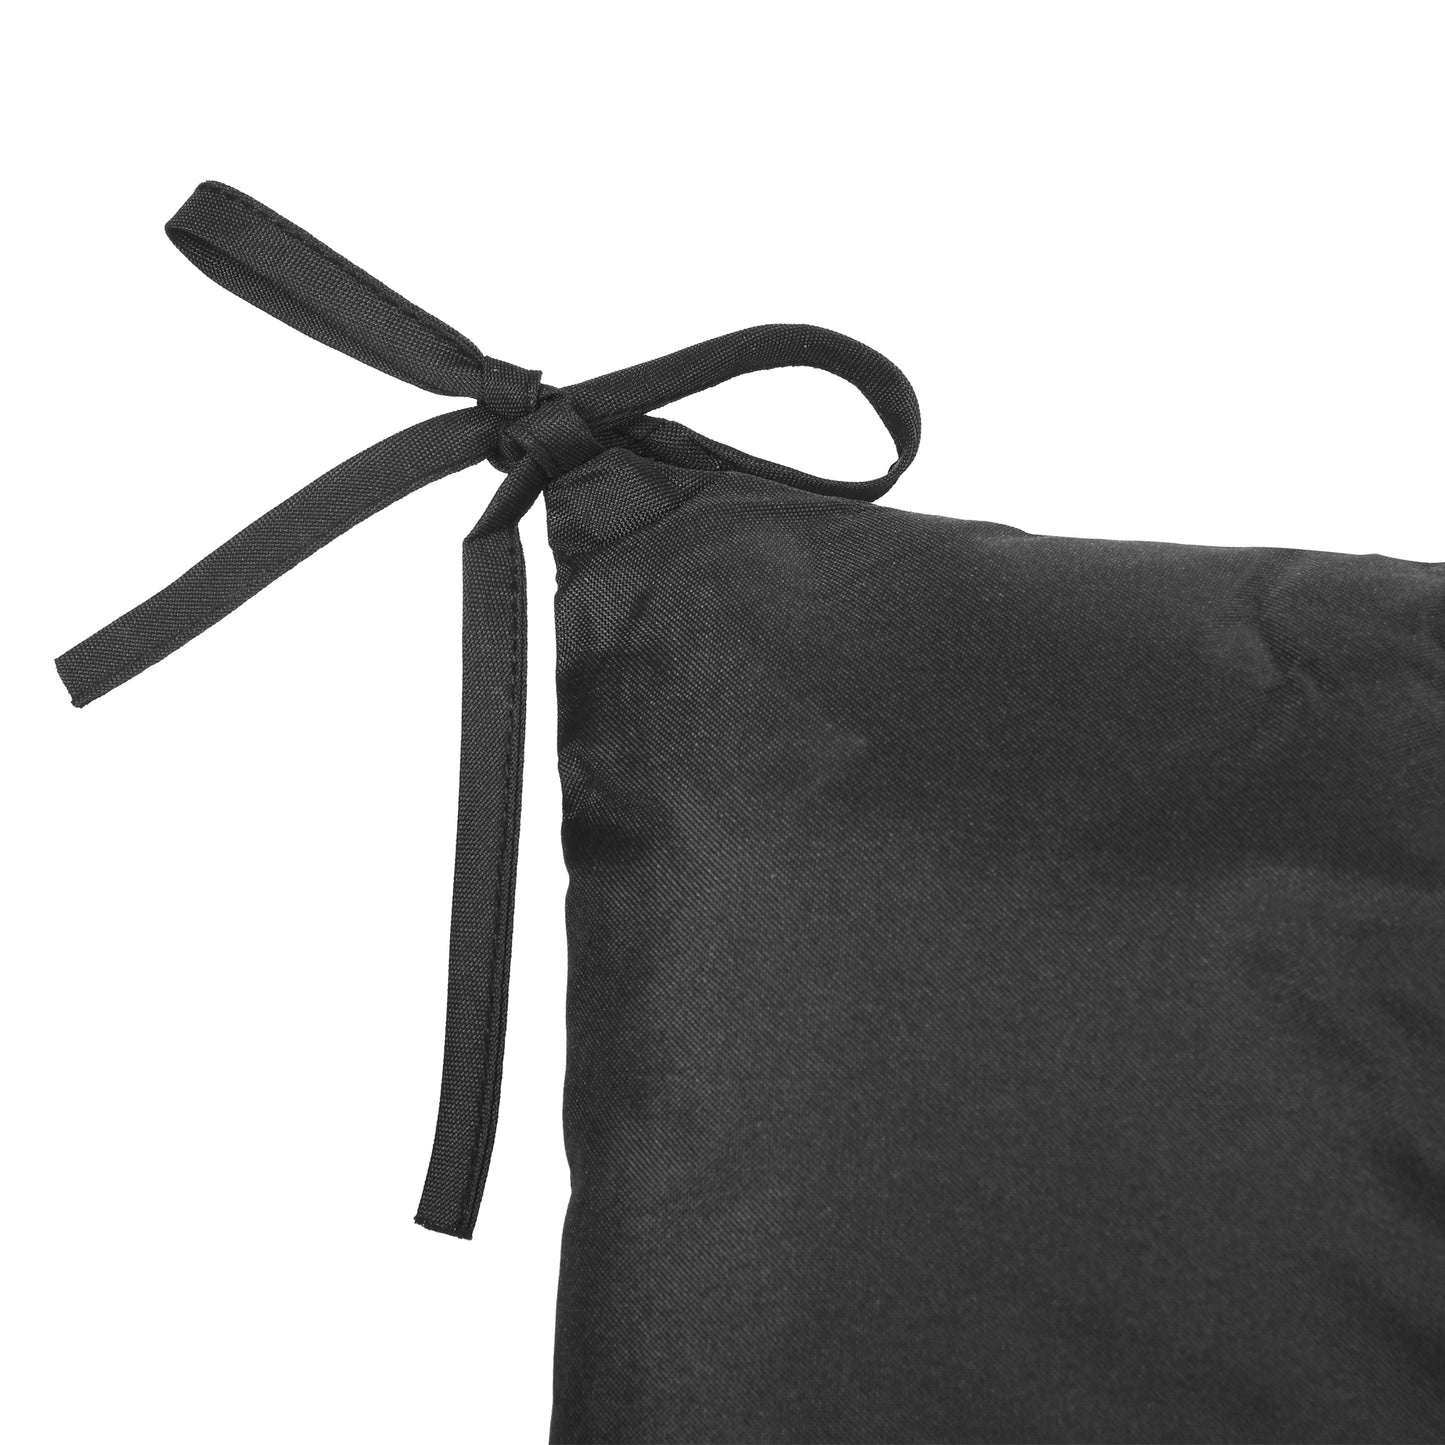 Outsunny Garden Bench Cushion: Cosy Outdoor Seating Pad with Back Support and Ties, Black, 98 x 150 cm